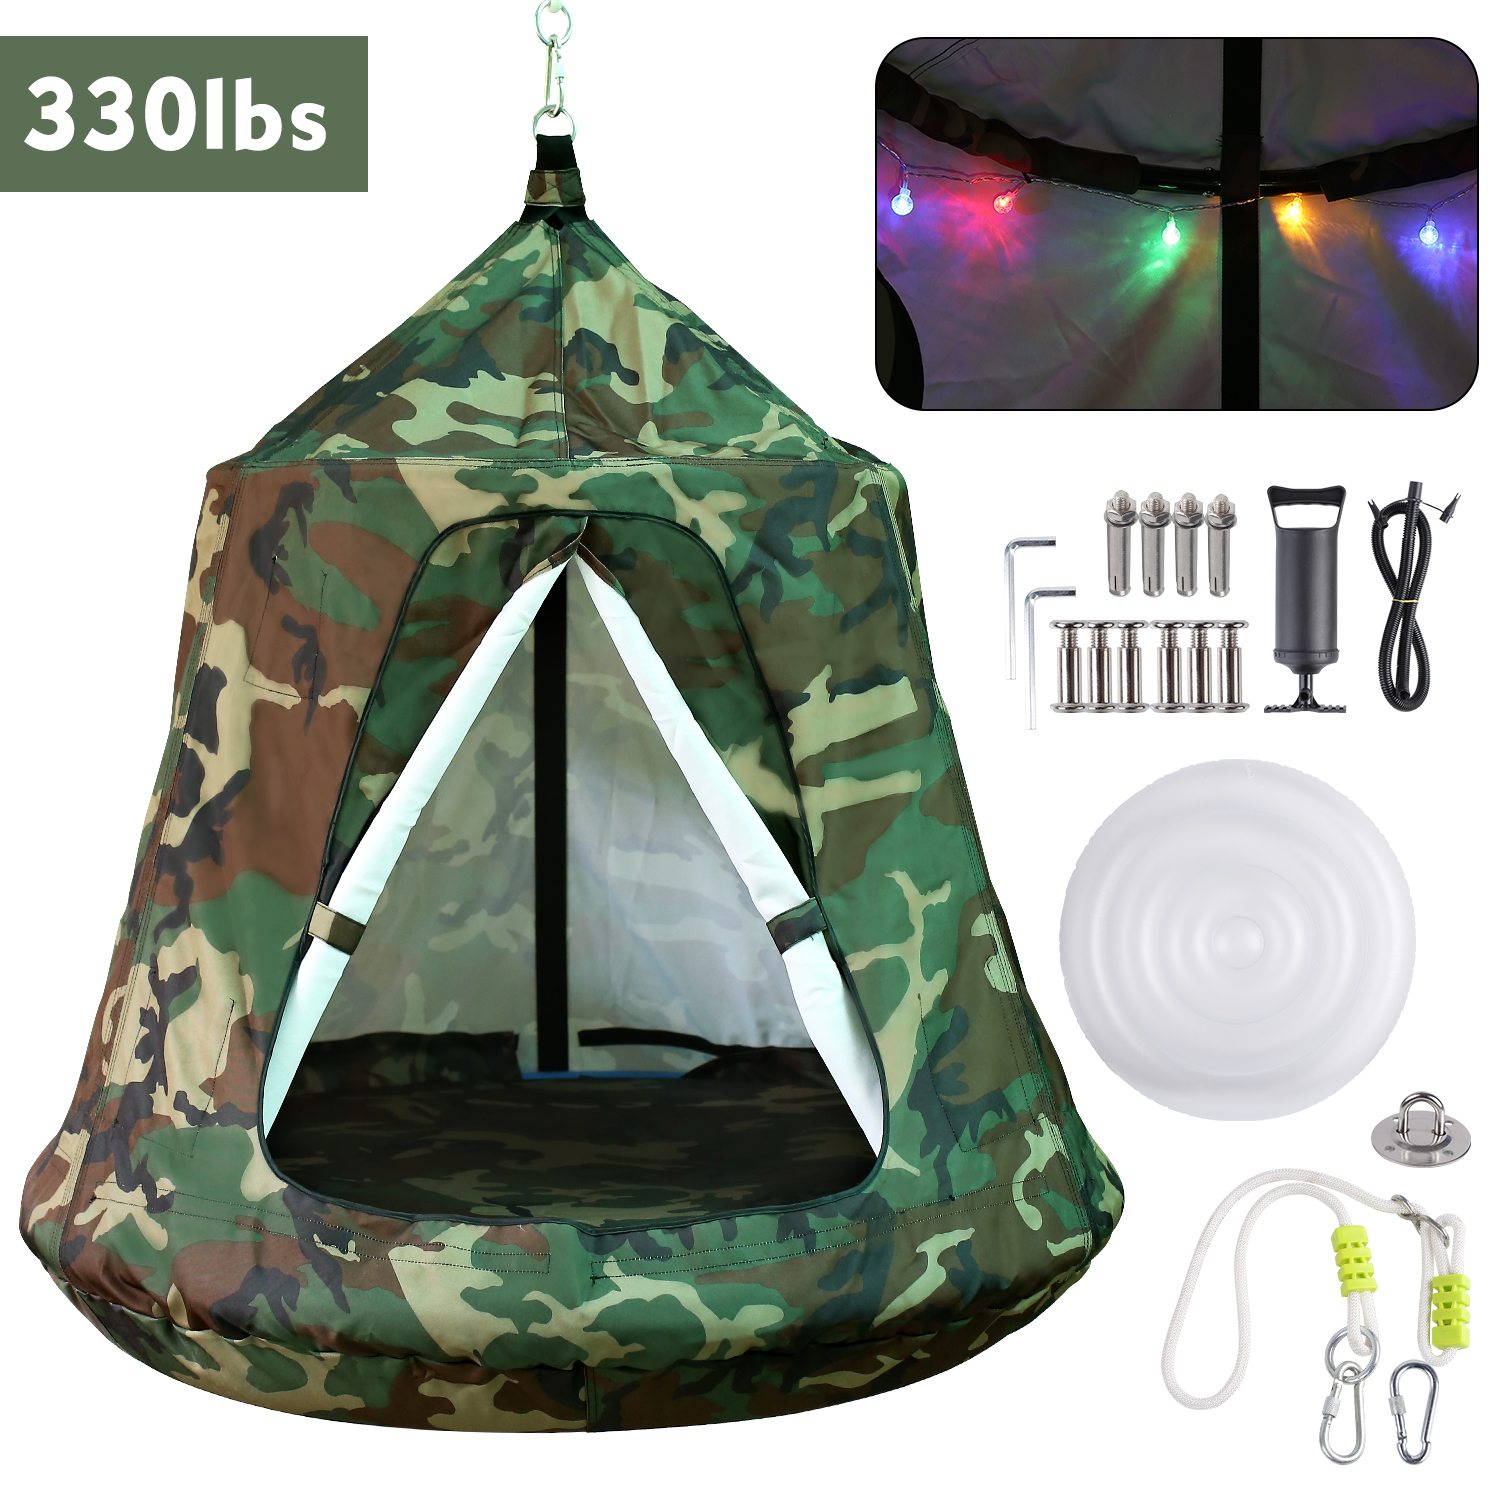 GARTIO Hanging Tree Tent, Kids Playhouse Swing Hanging Tent with LED Lights for Indoor Outdoor - image 1 of 7